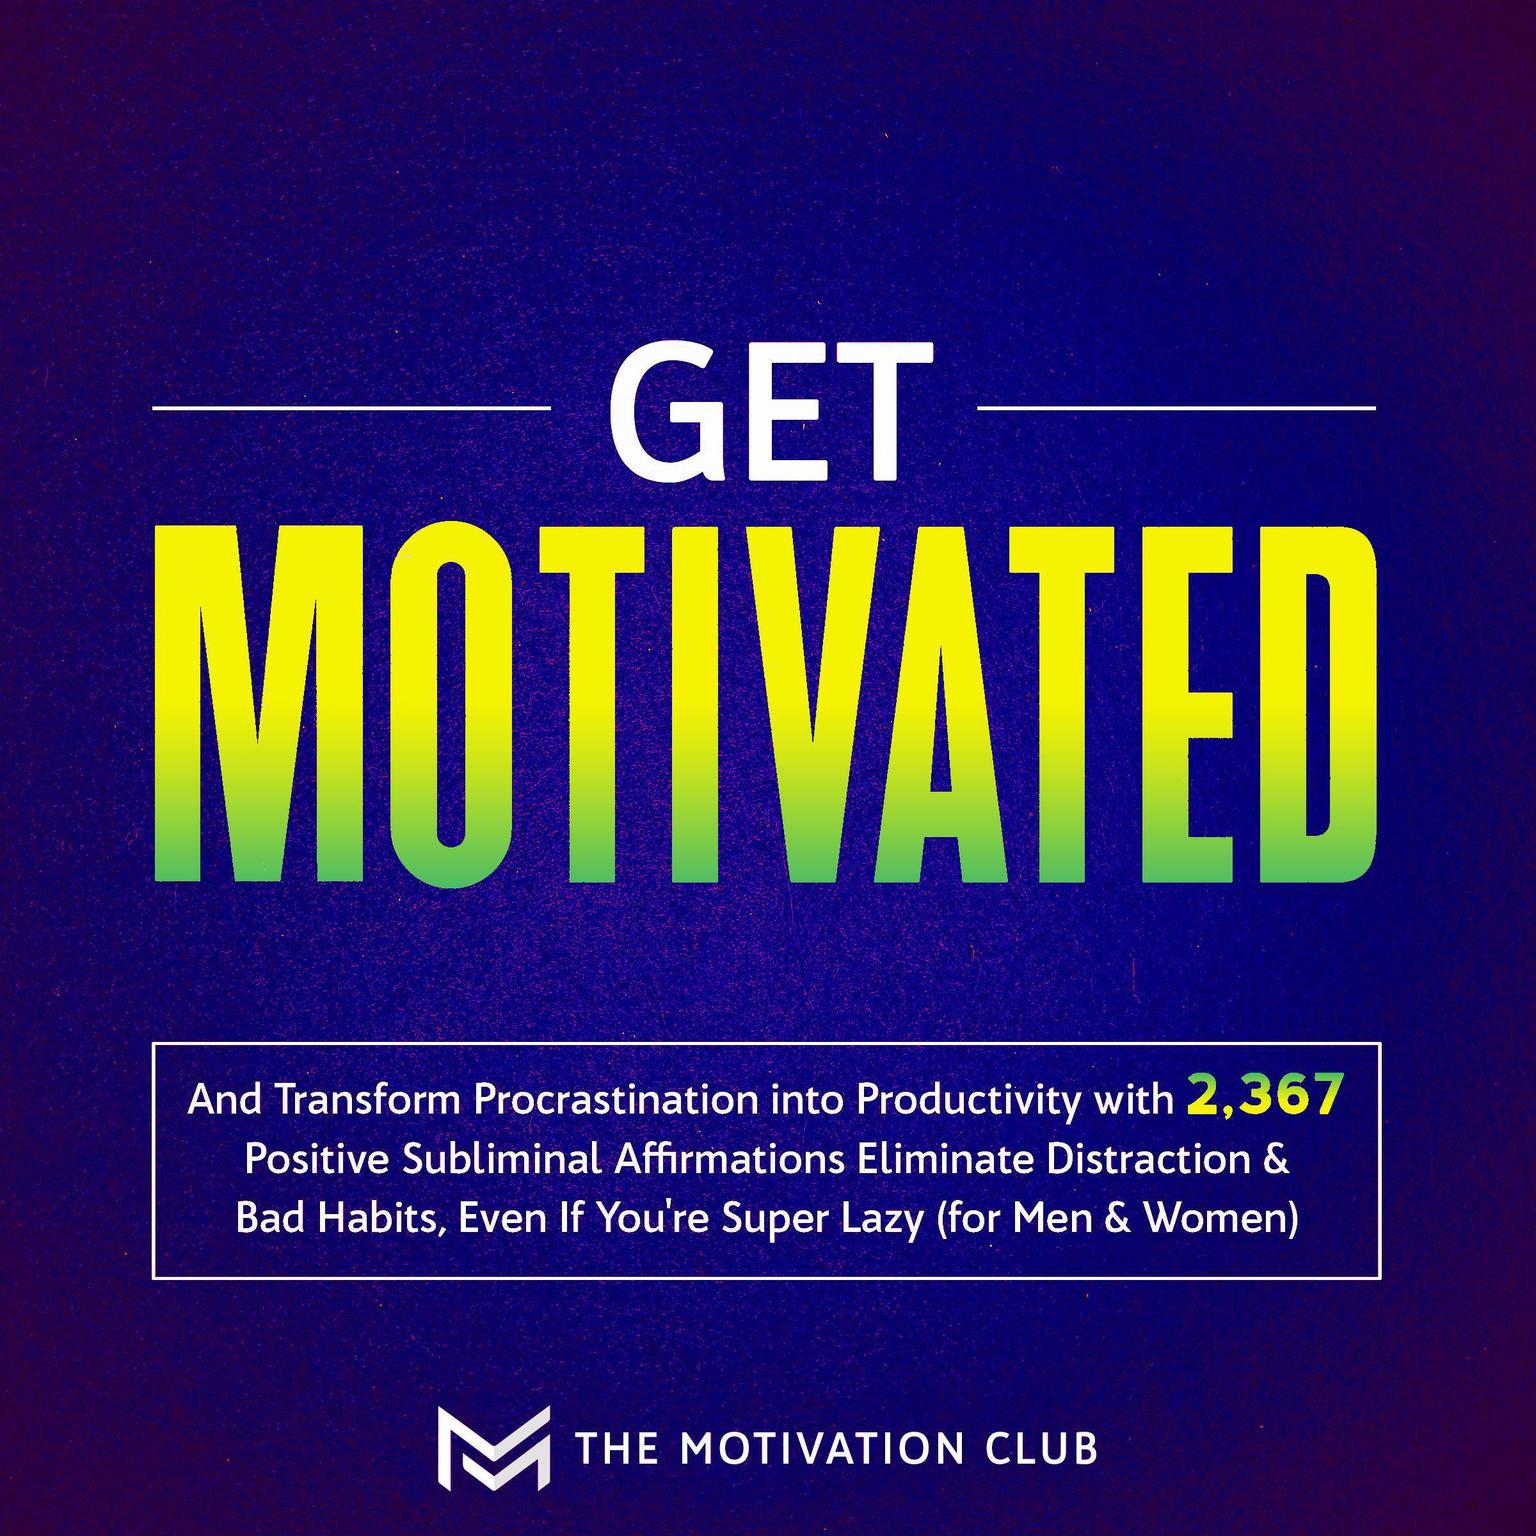 Get Motivated and Transform Procrastination into Productivity with 2,367 Positive Subliminal Affirmations: Eliminate Distraction & Bad Habits, Even If You’re Super Lazy (for Men & Women) Audiobook, by The Motivation Club